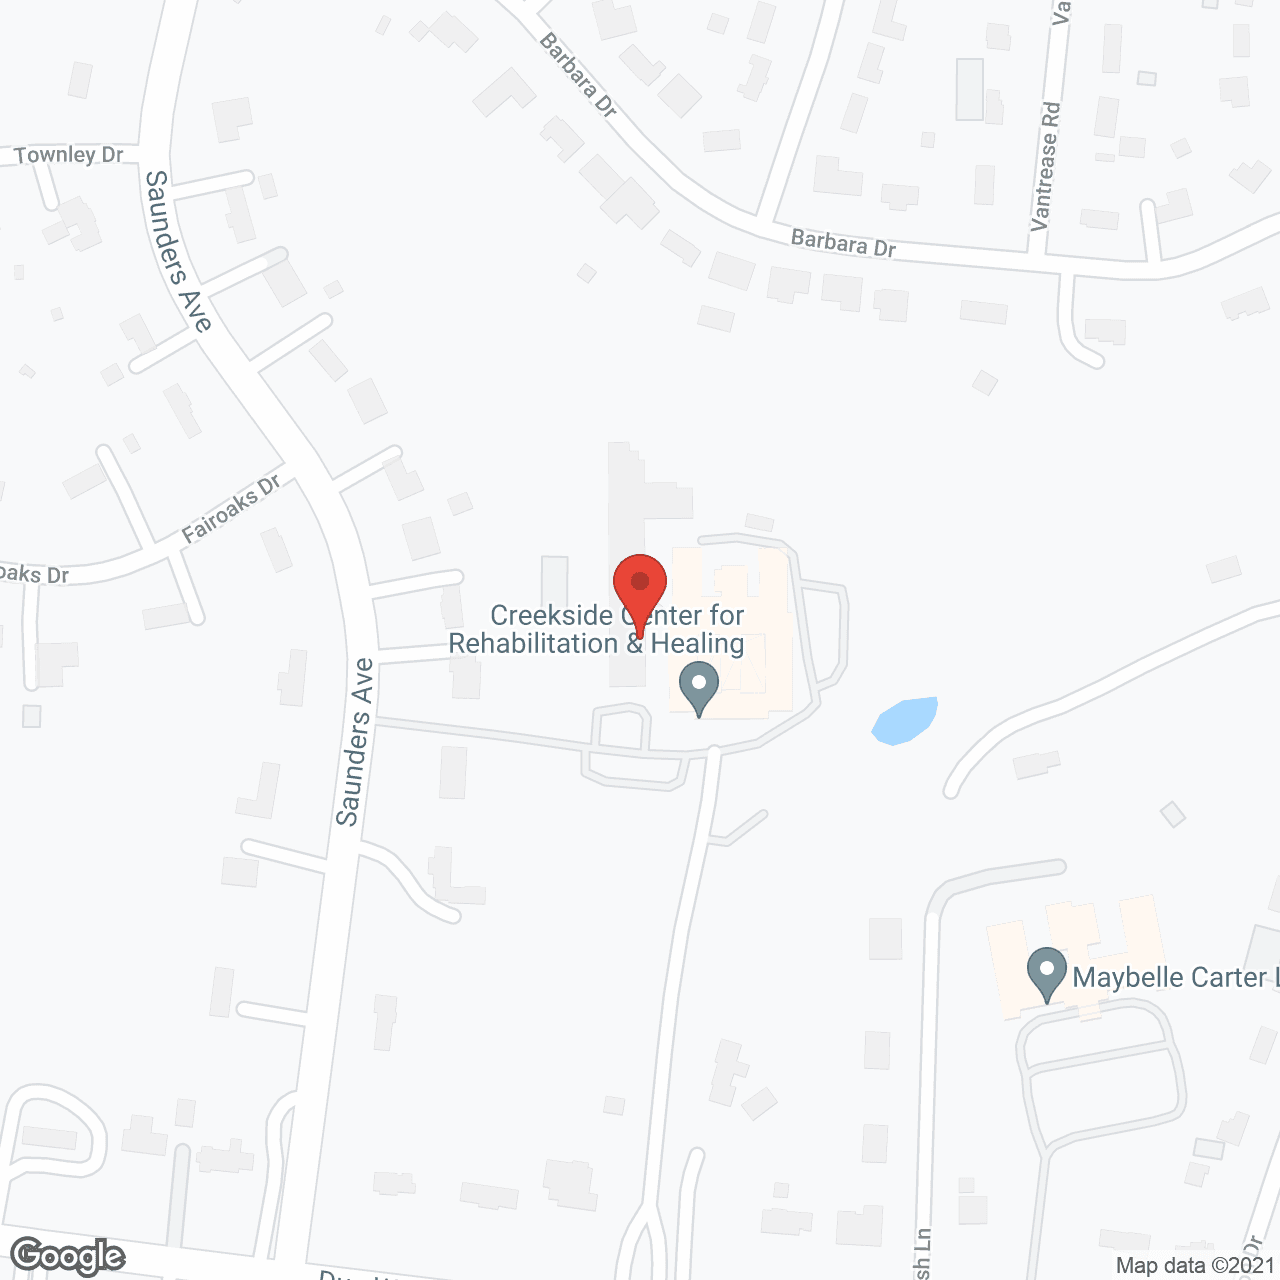 Creekside Health and Rehabilitation Center in google map